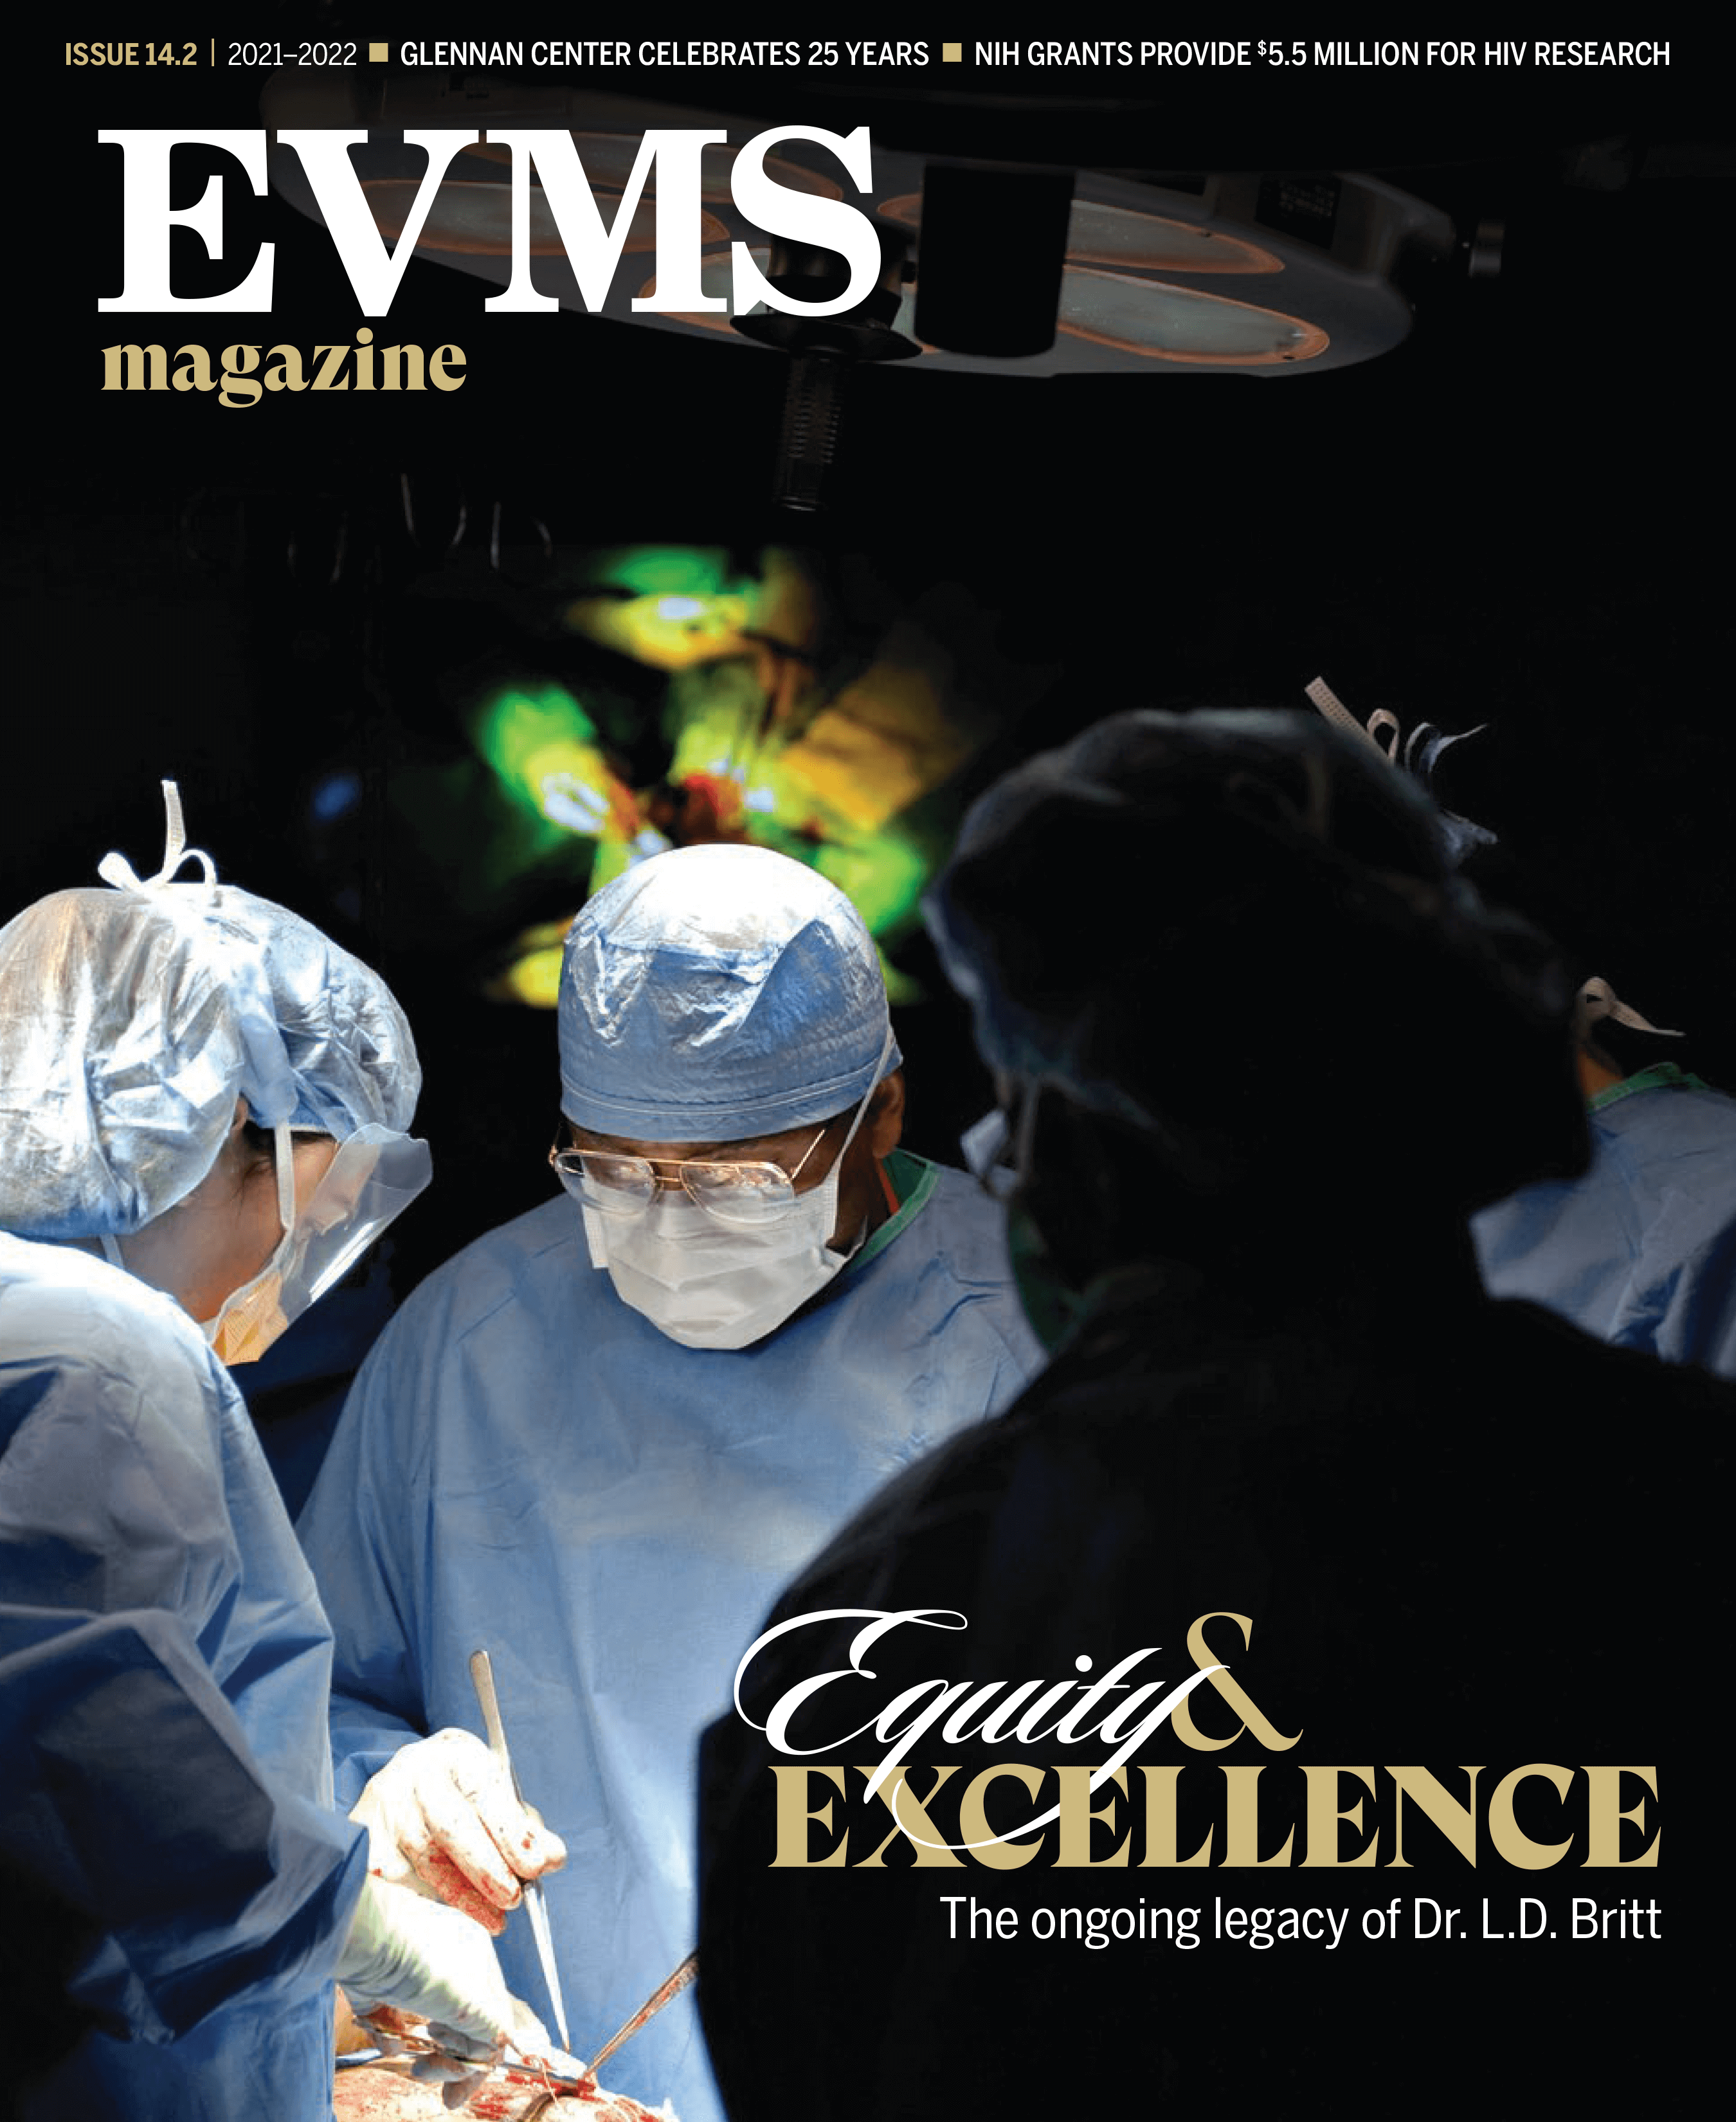 EVMS Magazine - 14.2 - 2021/2022 - Equity and Excellence